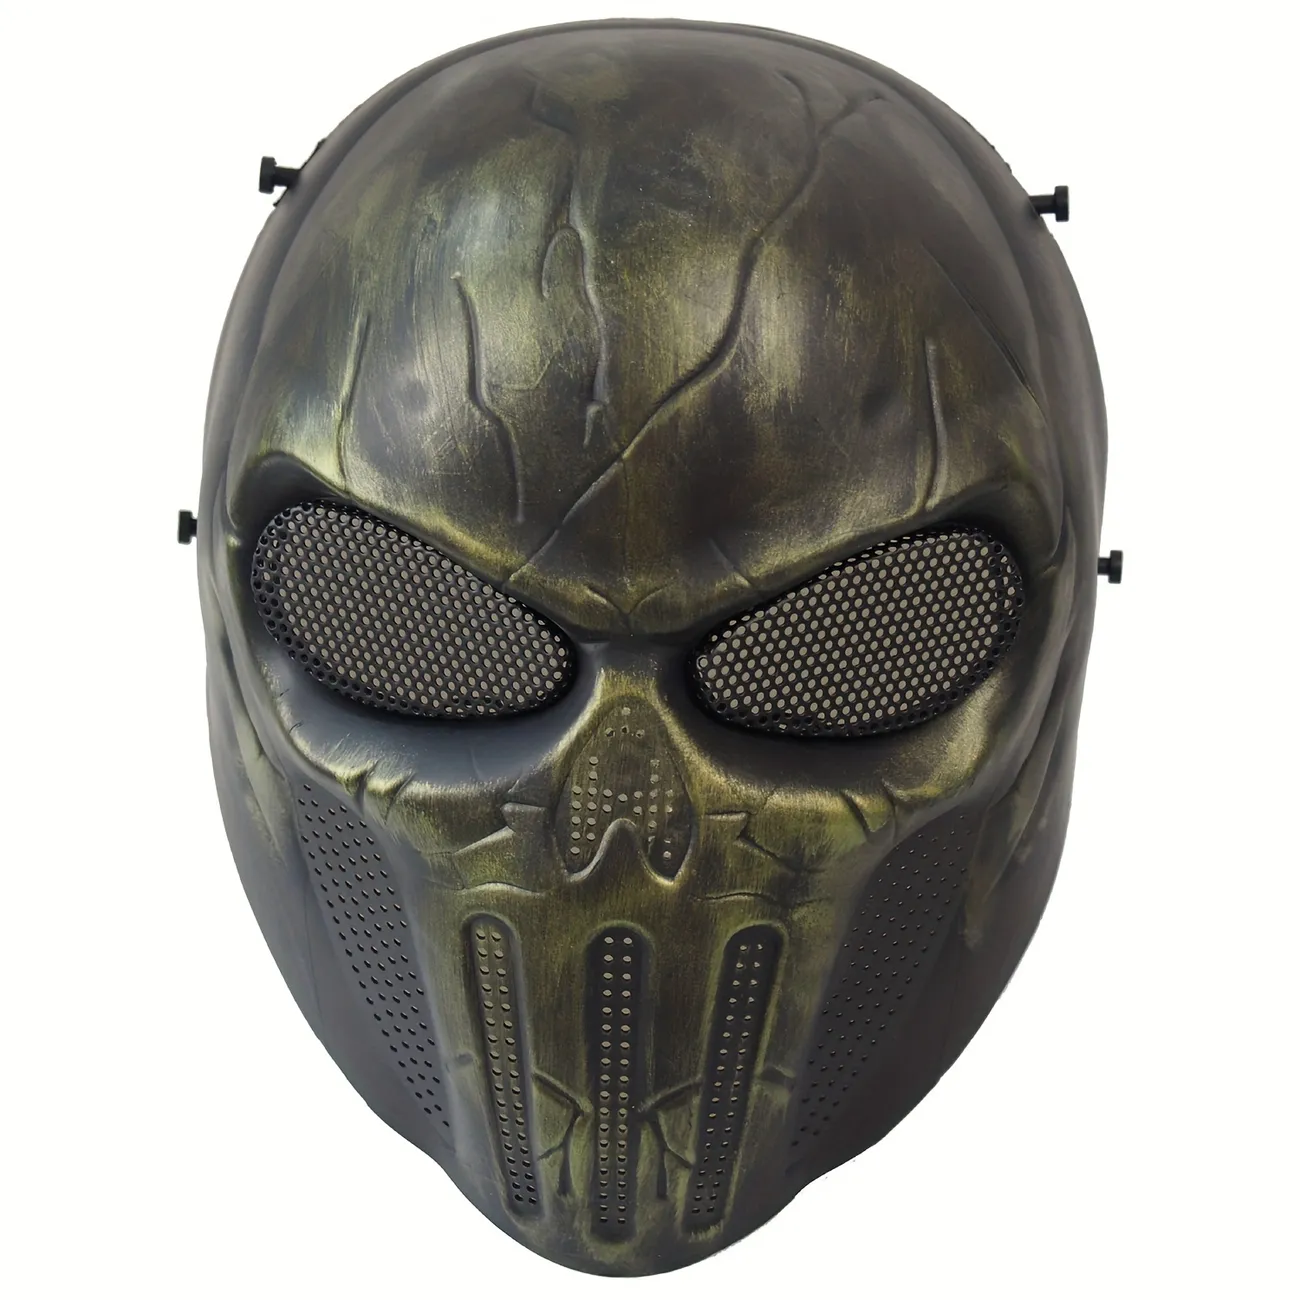 Full Face Airsoft Mask, Scary Skull Halloween Ghost Mask With Metal Mesh Eye Protection, For Cs War Game Shooting Masquerade Cosplay Movie Props Party